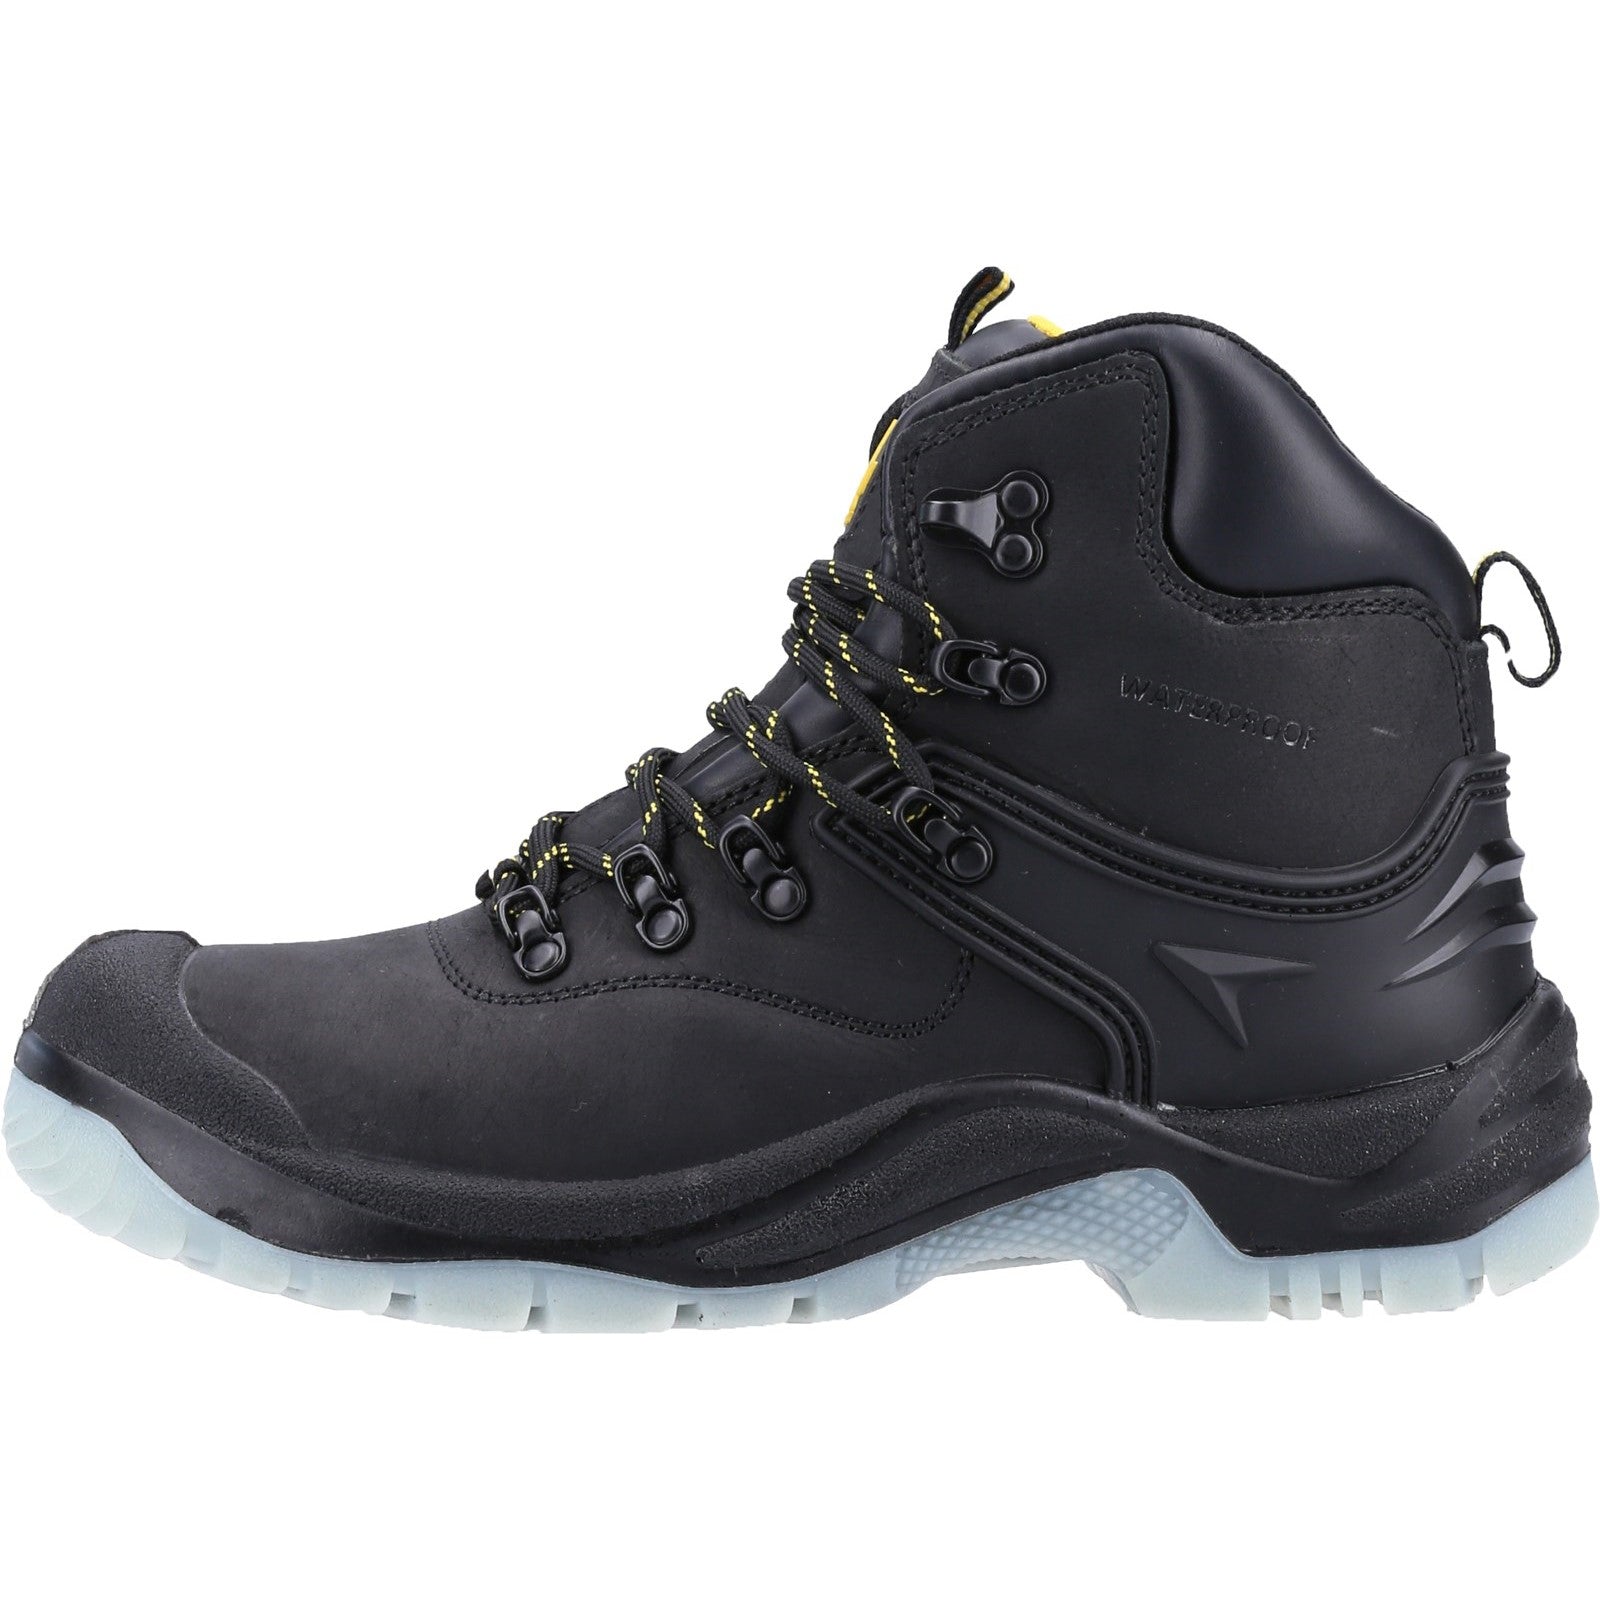 Amblers FS198 Safety Boot